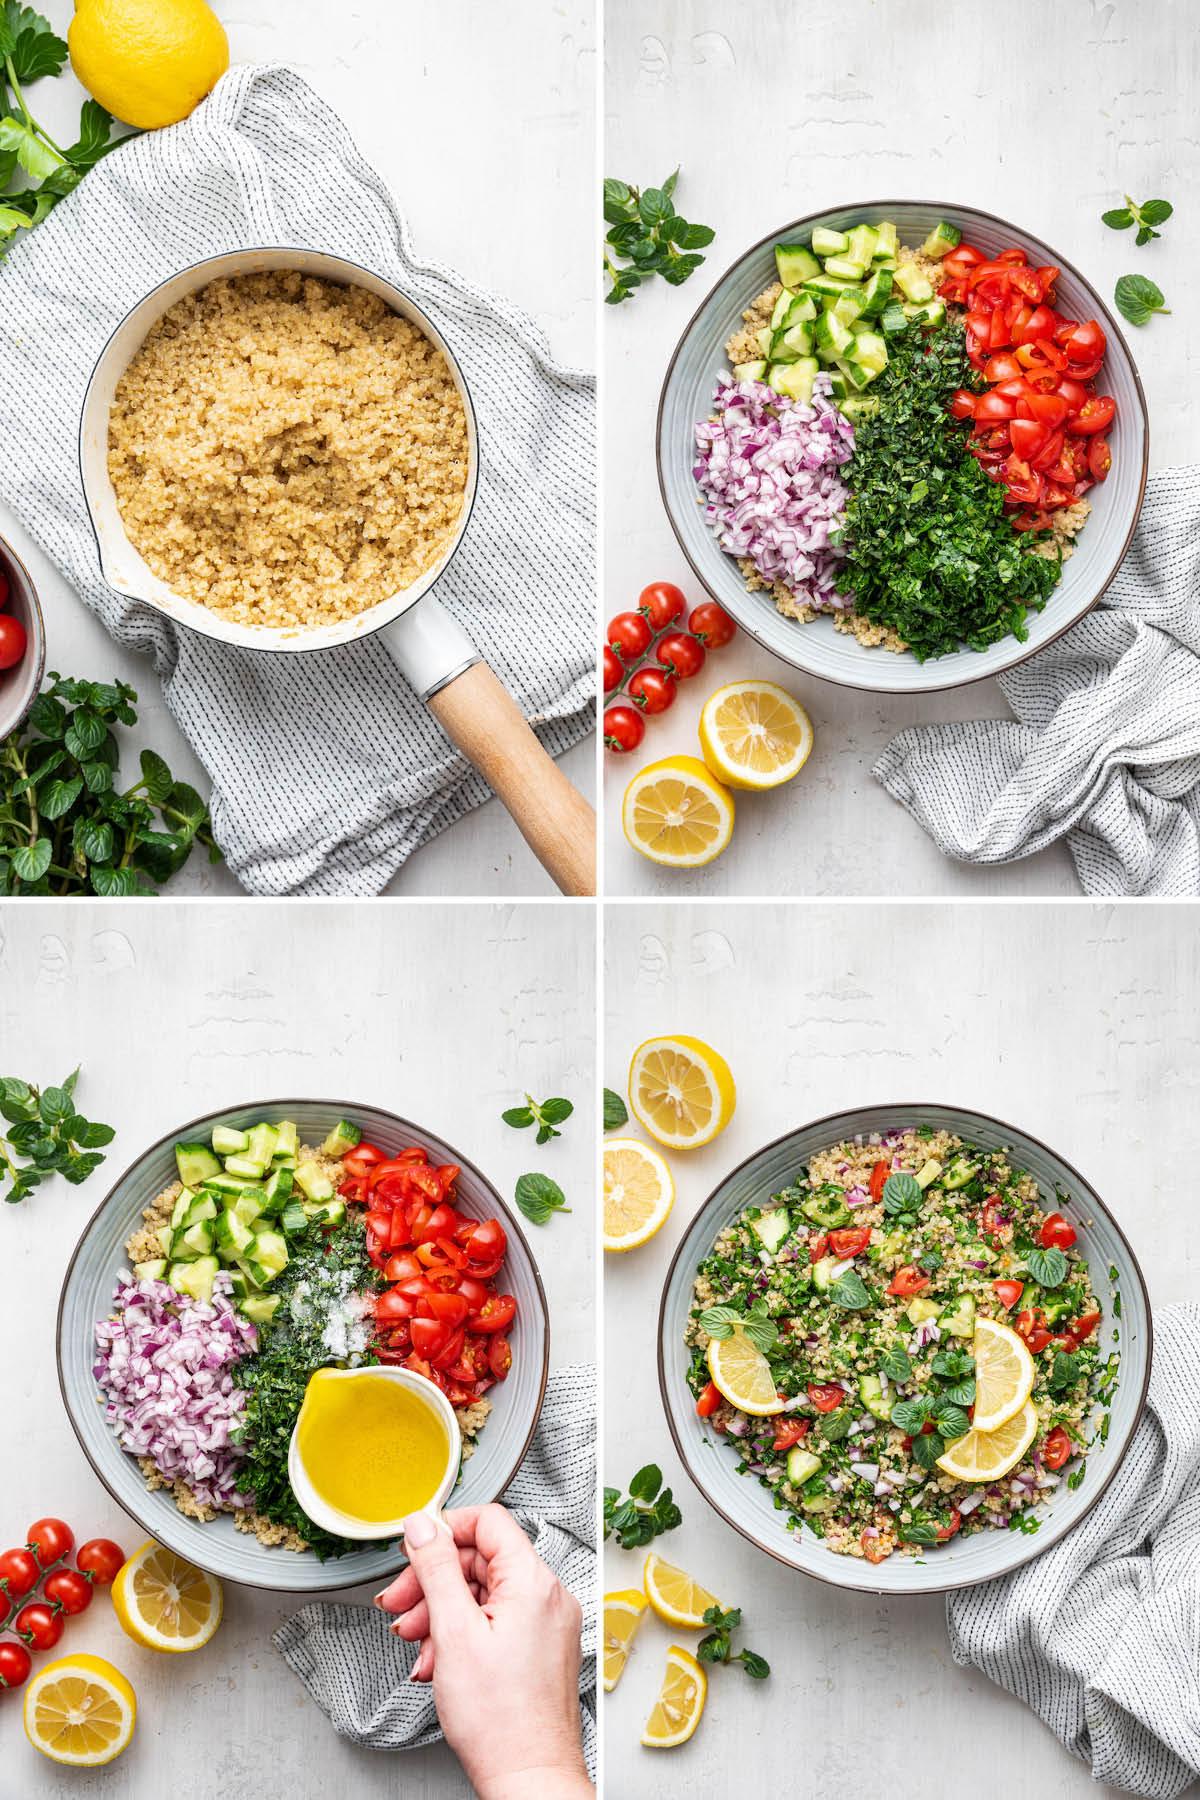 Collage of four photos showing the steps to make Quinoa Tabbouleh: cooking quinoa, adding quinoa and veggies to a bowl and then tossing with lemon, olive oil and salt.